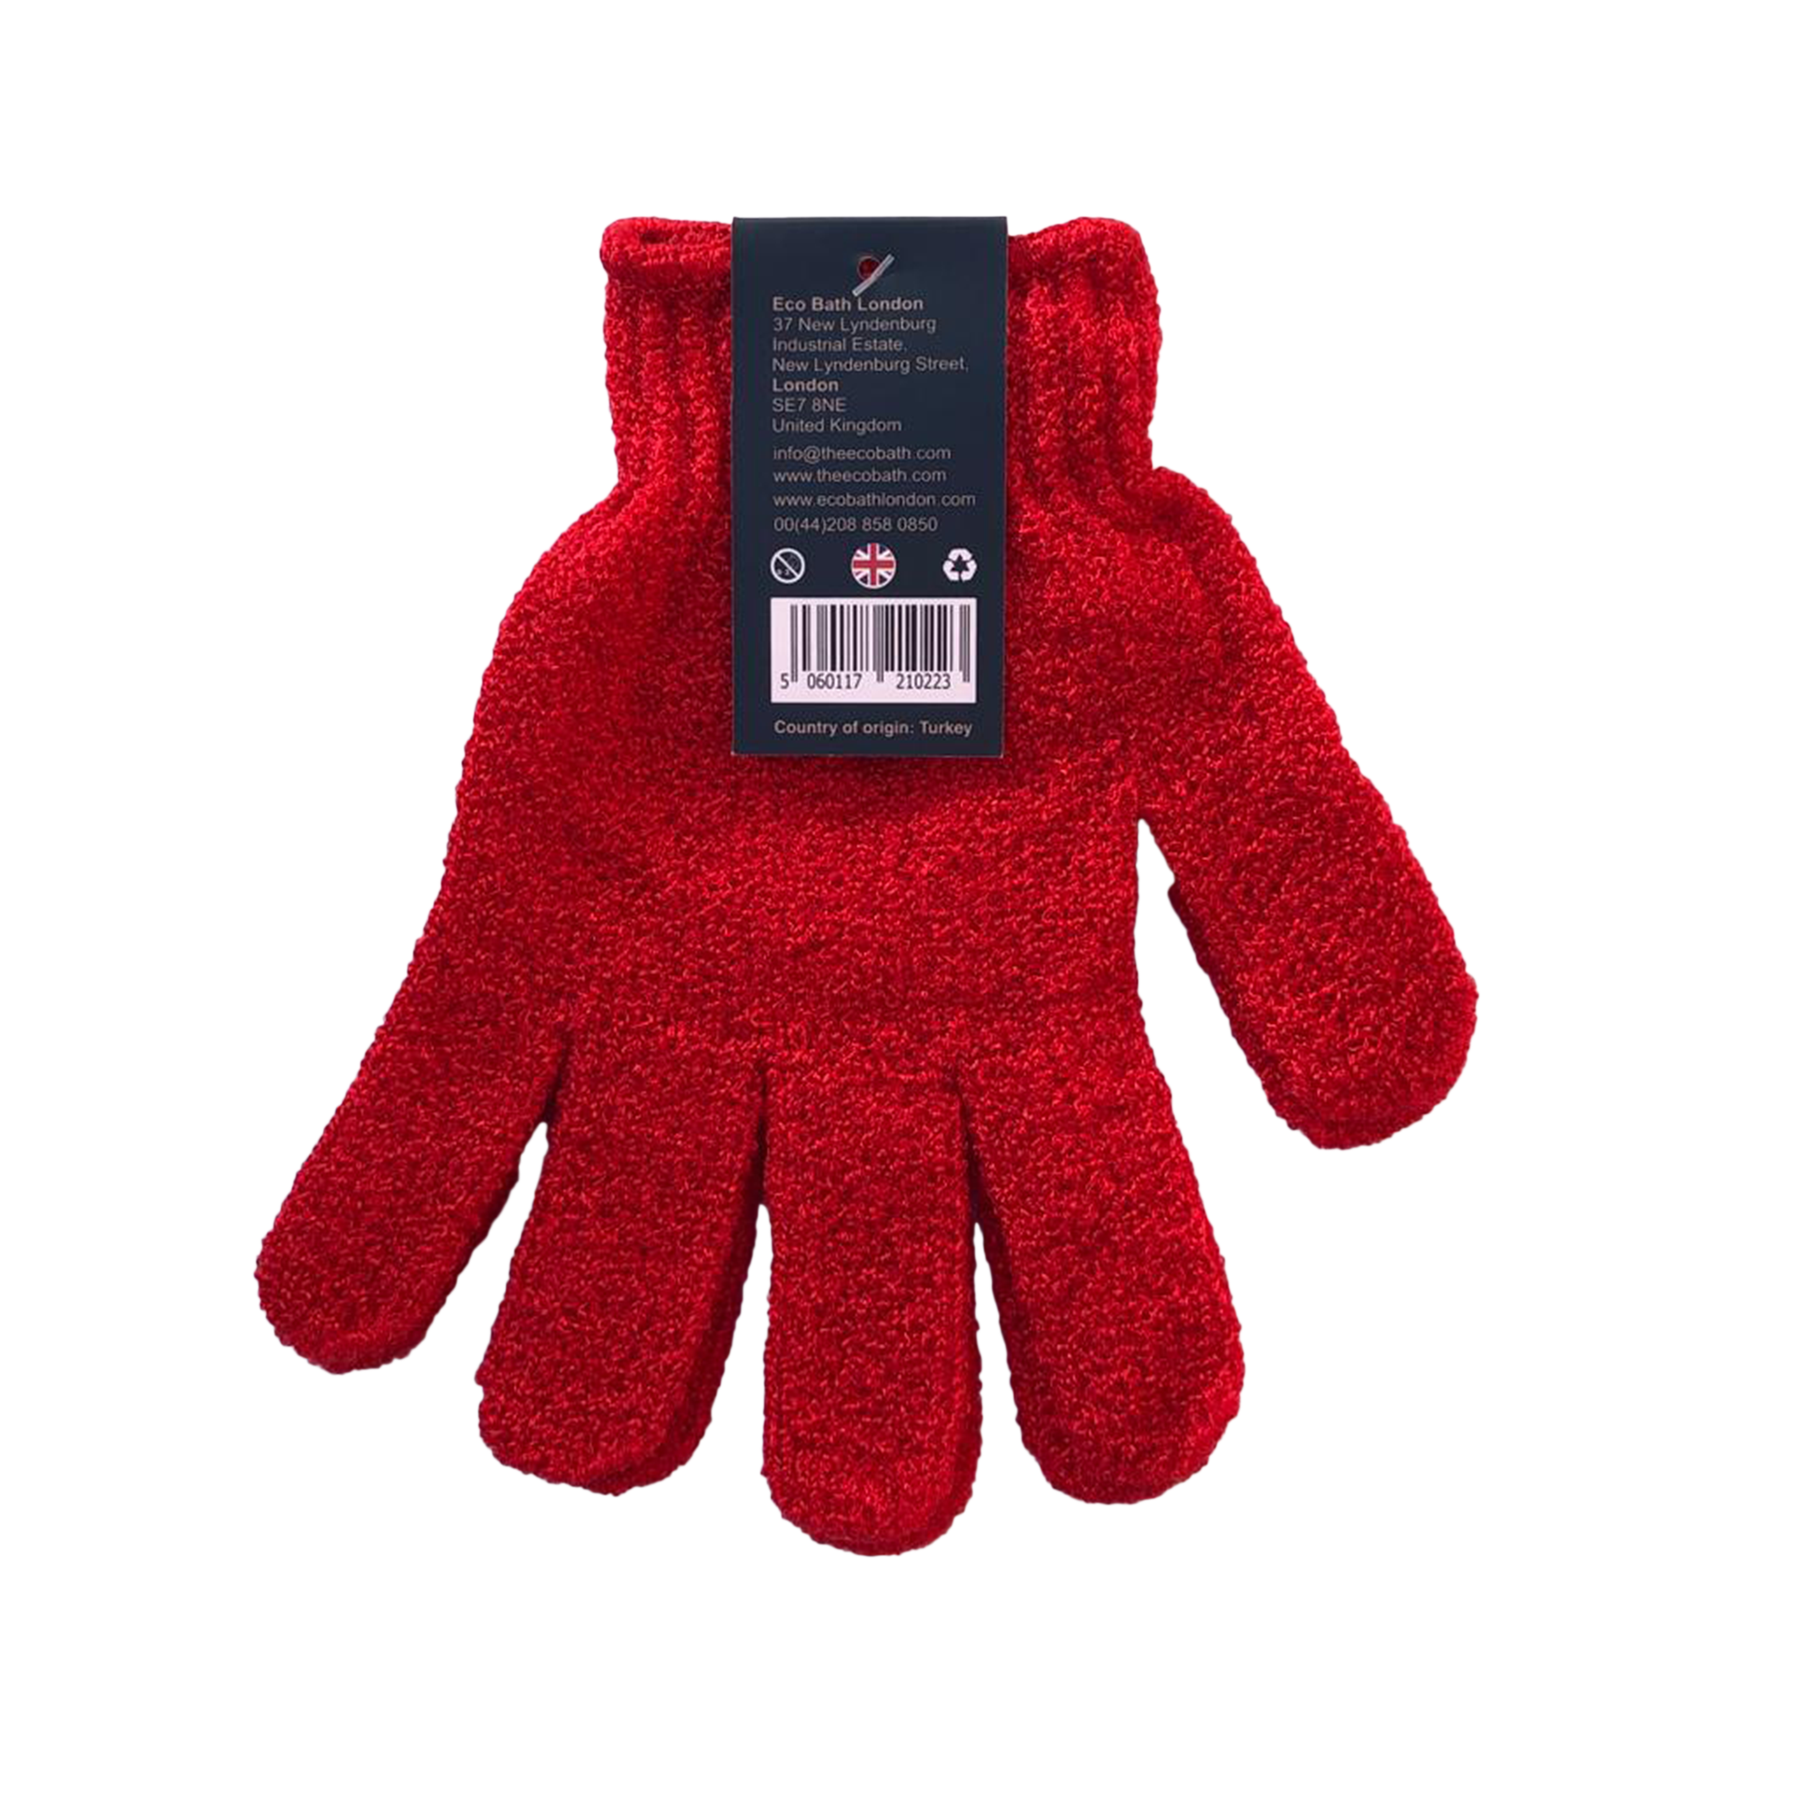 exfoliating bath gloves, red in colour, on white background, eco bath london